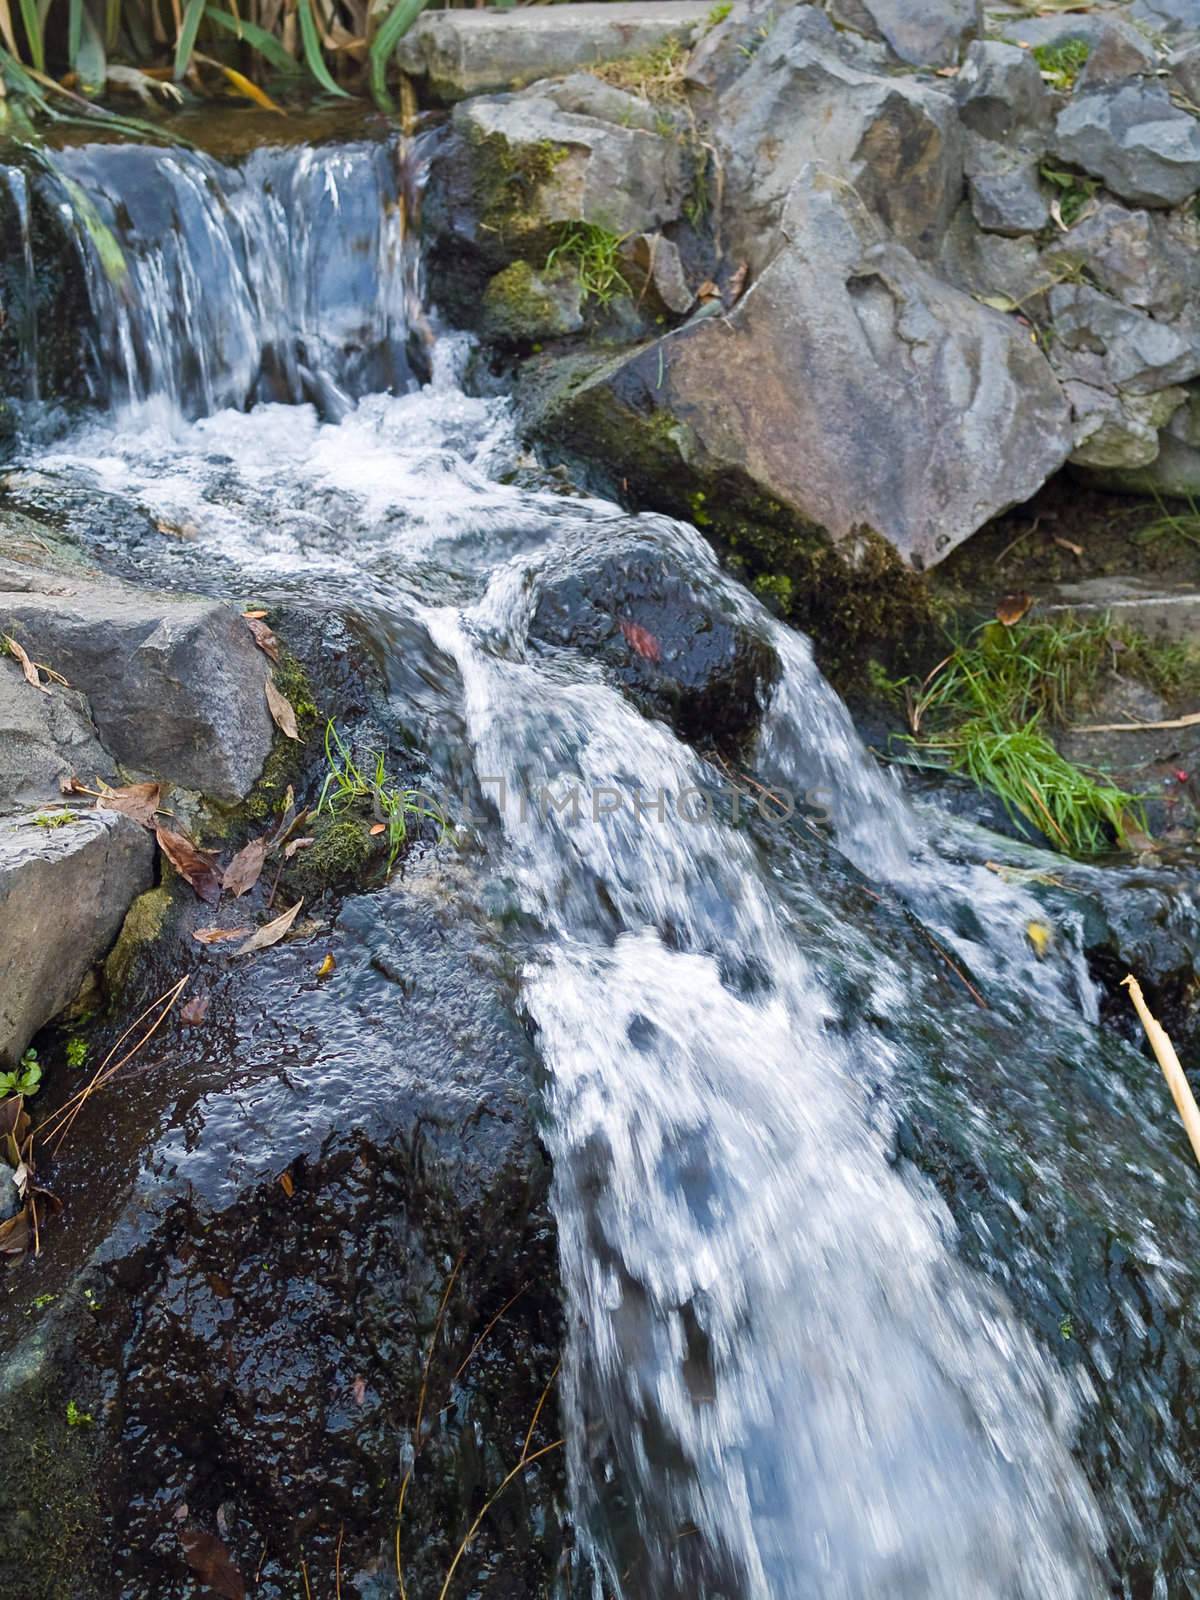 A Small Stream Flowing Over Some Rocks Makes a Waterfall